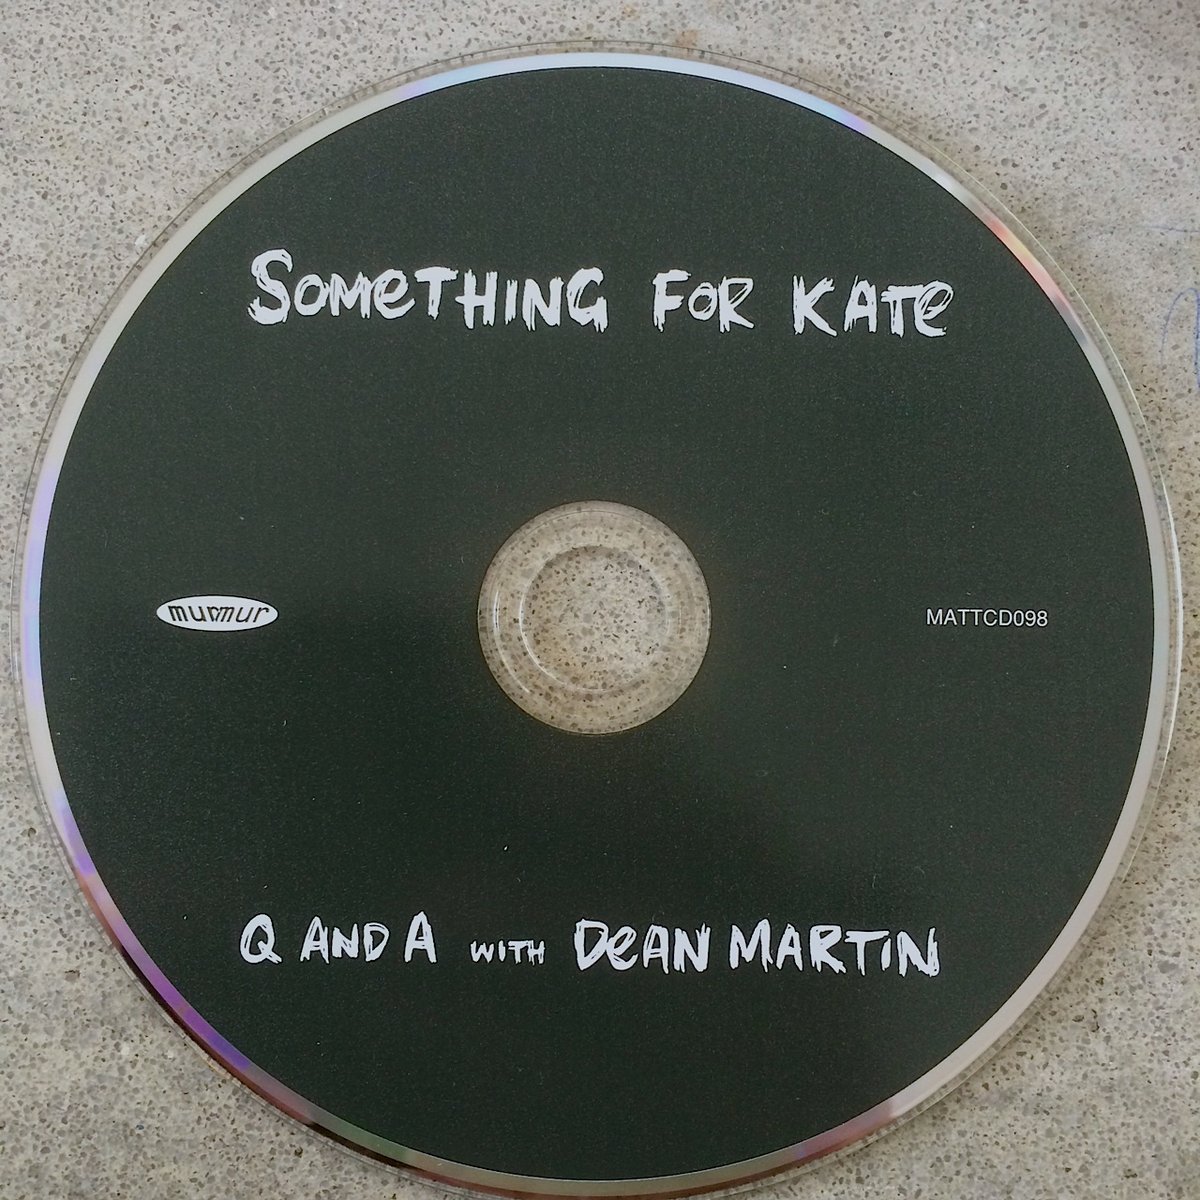 Image of Something for Kate - 'Q And A With Dean Martin' CD Original 